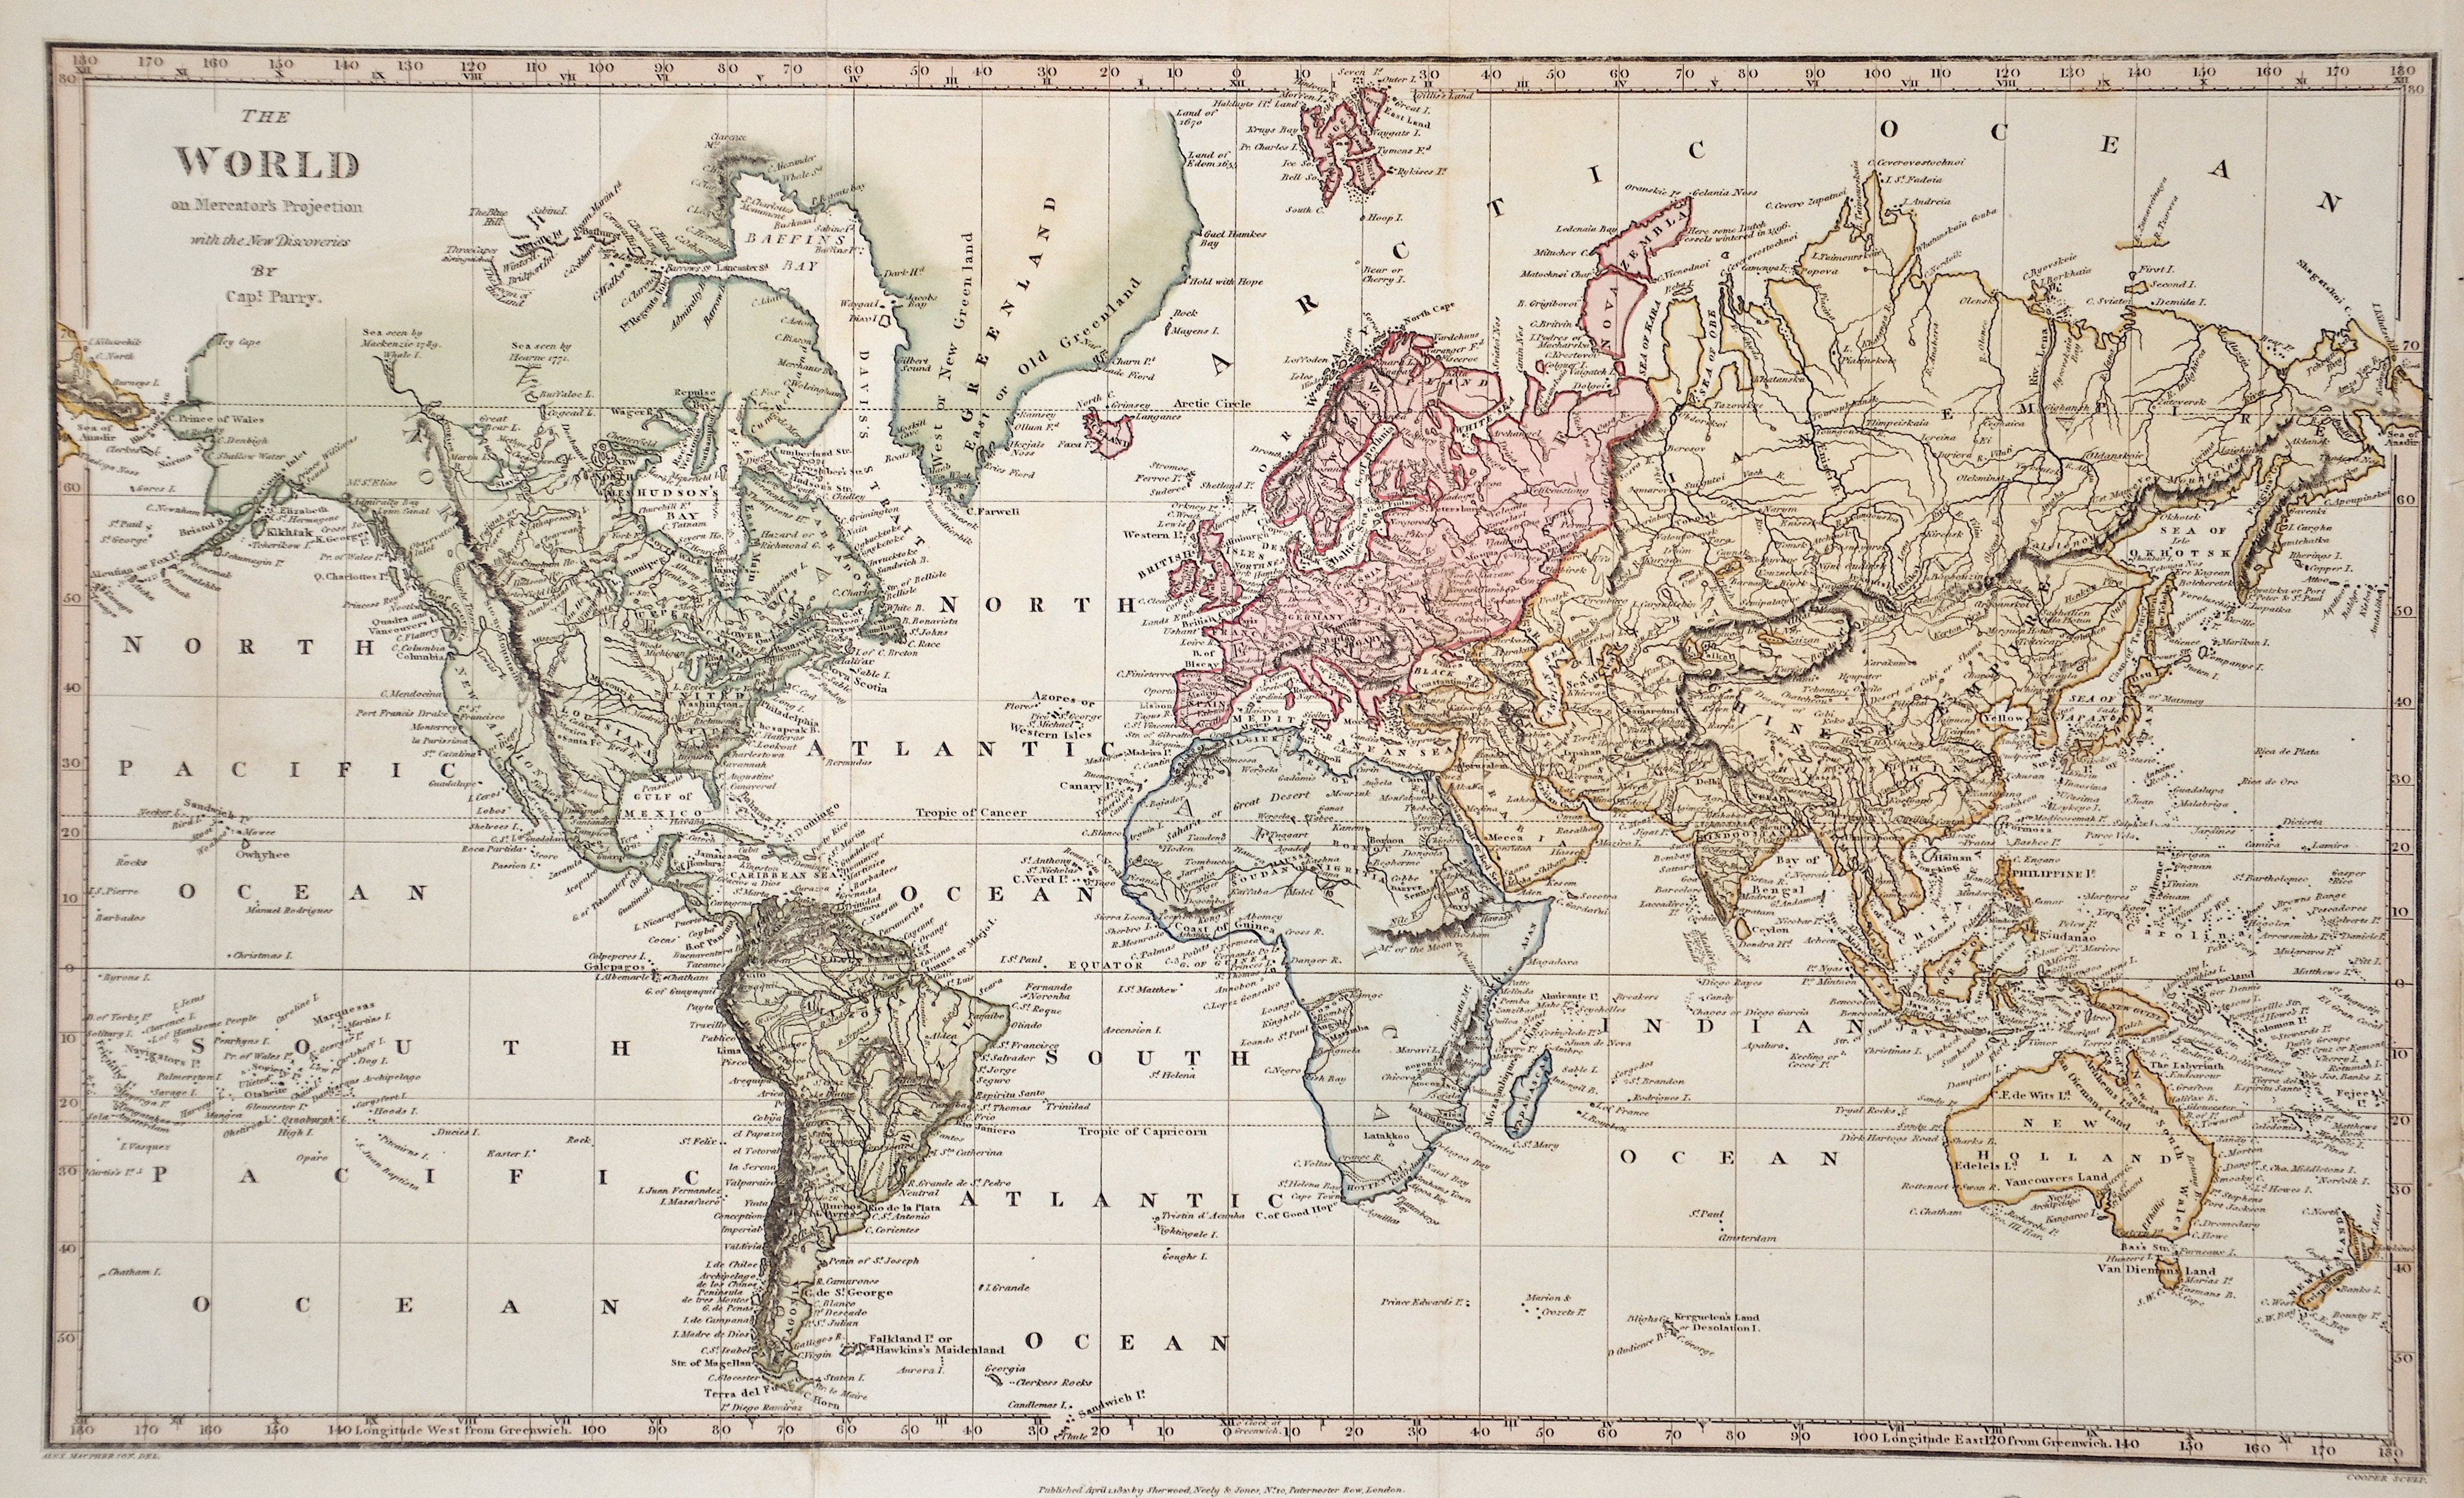 Parry William E. The World on Mercator’s Projection with the New Discoveries by Capt. Parry.